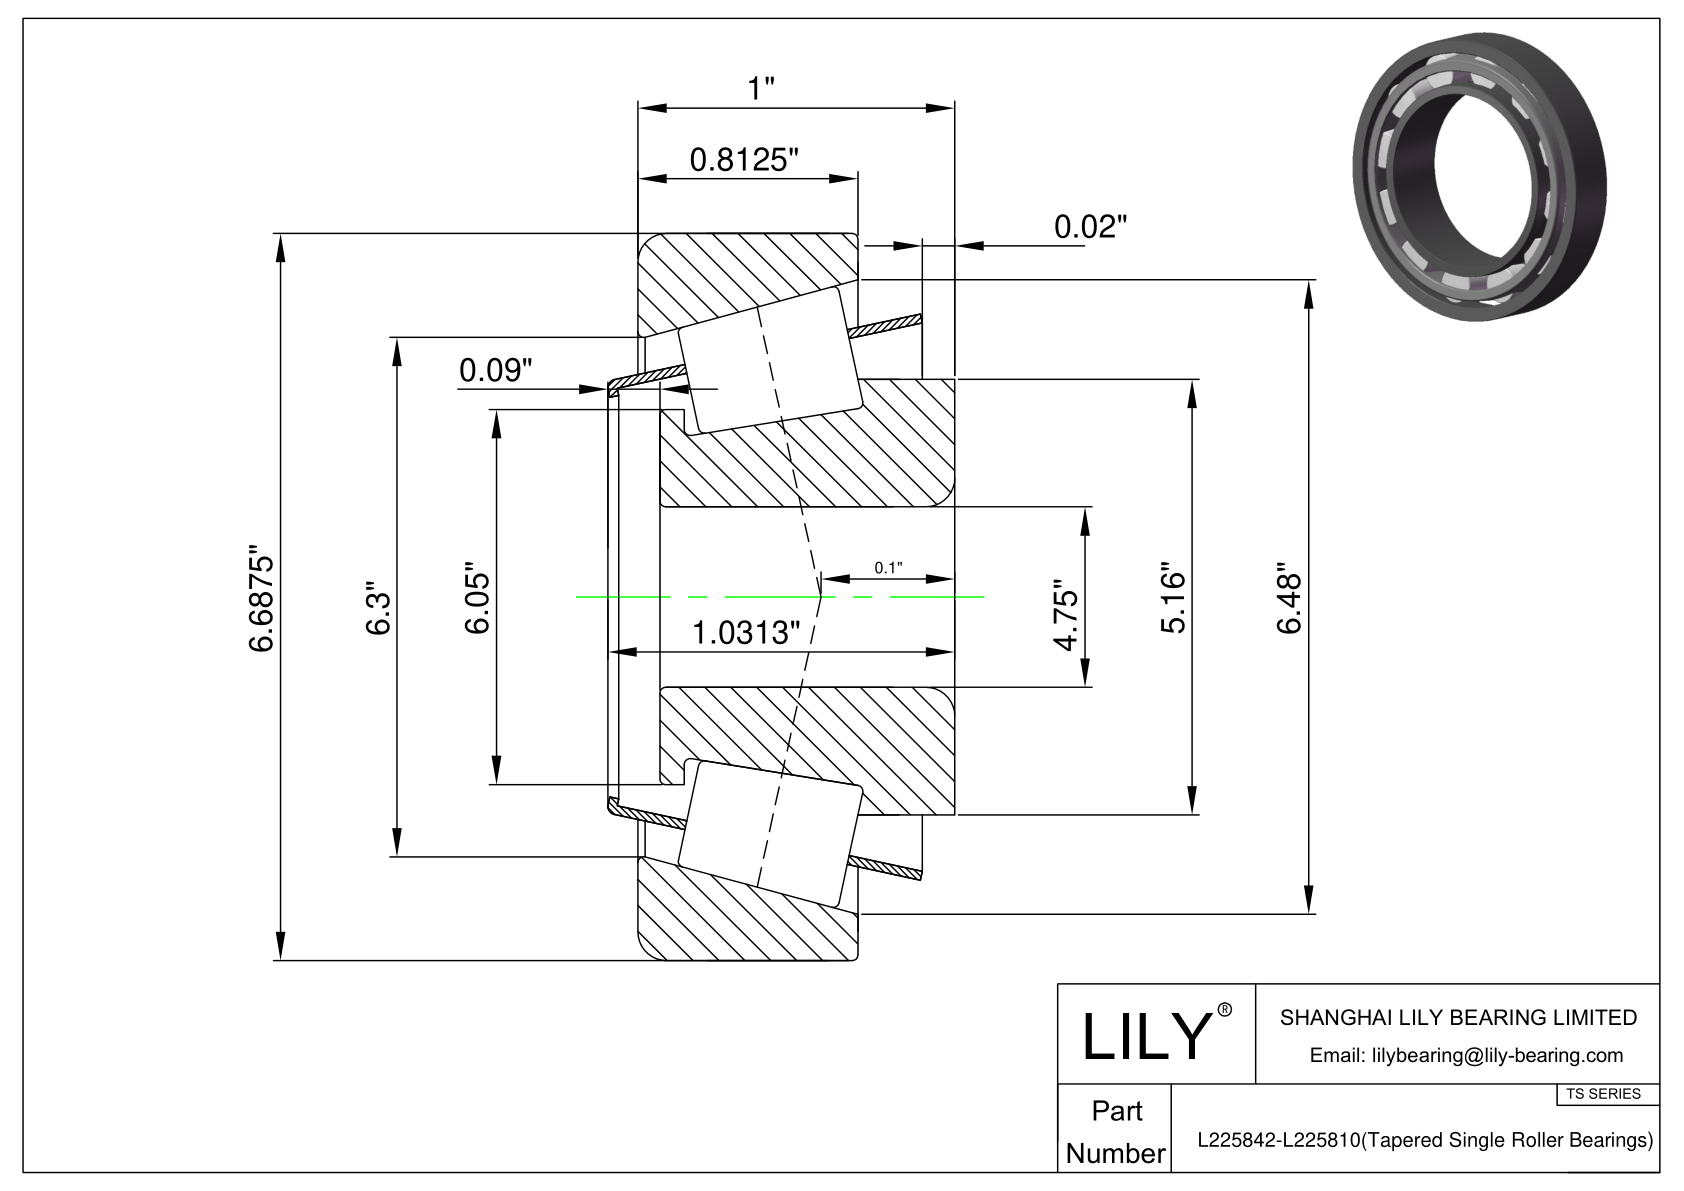 L225842-L225810 TS (Tapered Single Roller Bearings) (Imperial) cad drawing